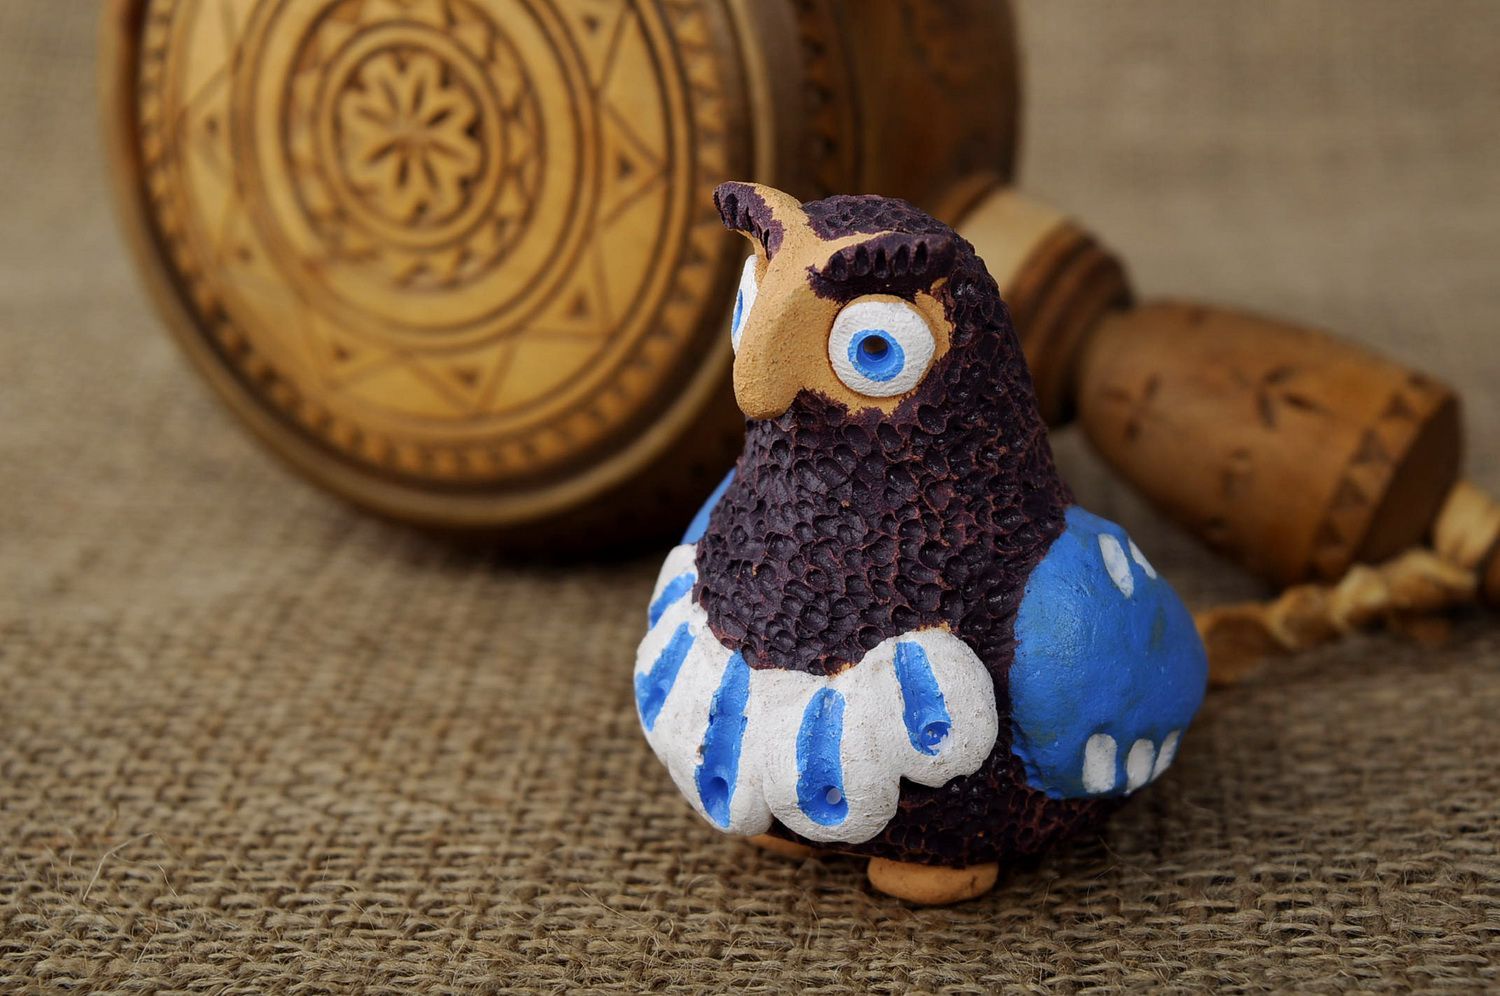 Penny whistle in the form of owl made of clay photo 5